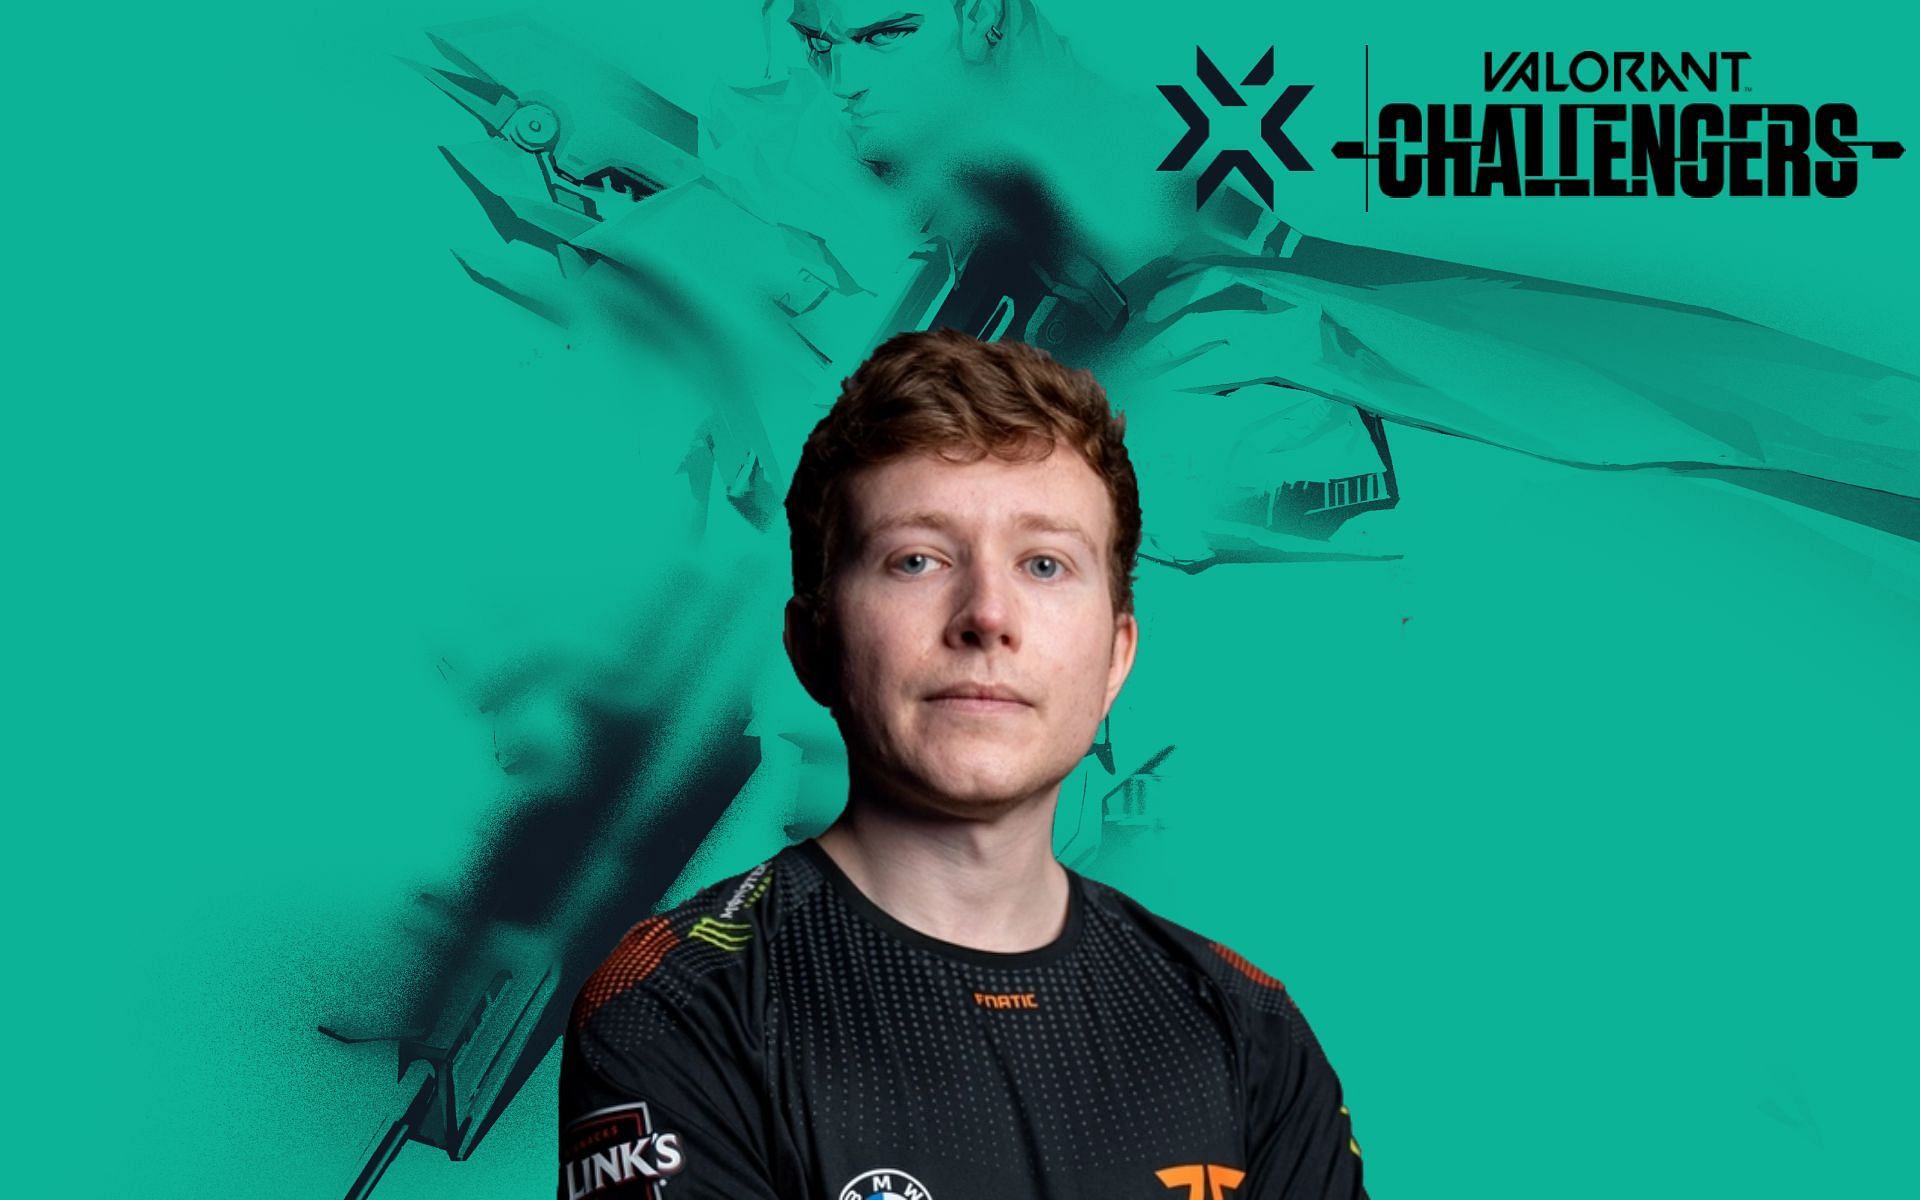 Fnatic&#039;s head coach Mini comments on their performance at the VCT 2022 Stage 1 EMEA Challengers Group Stage Image via Sportskeeda)